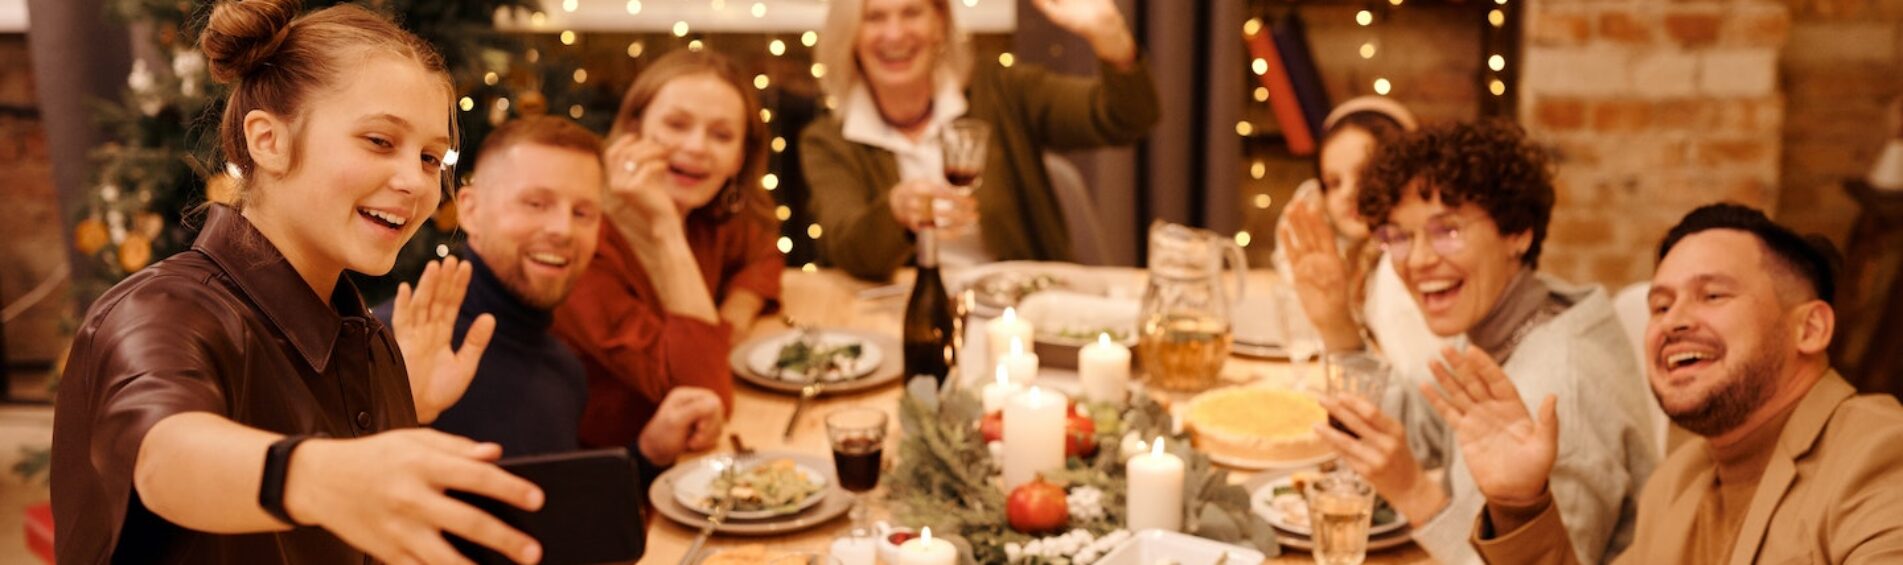 Blended Family Holiday Season: How to Maintain Your Sanity